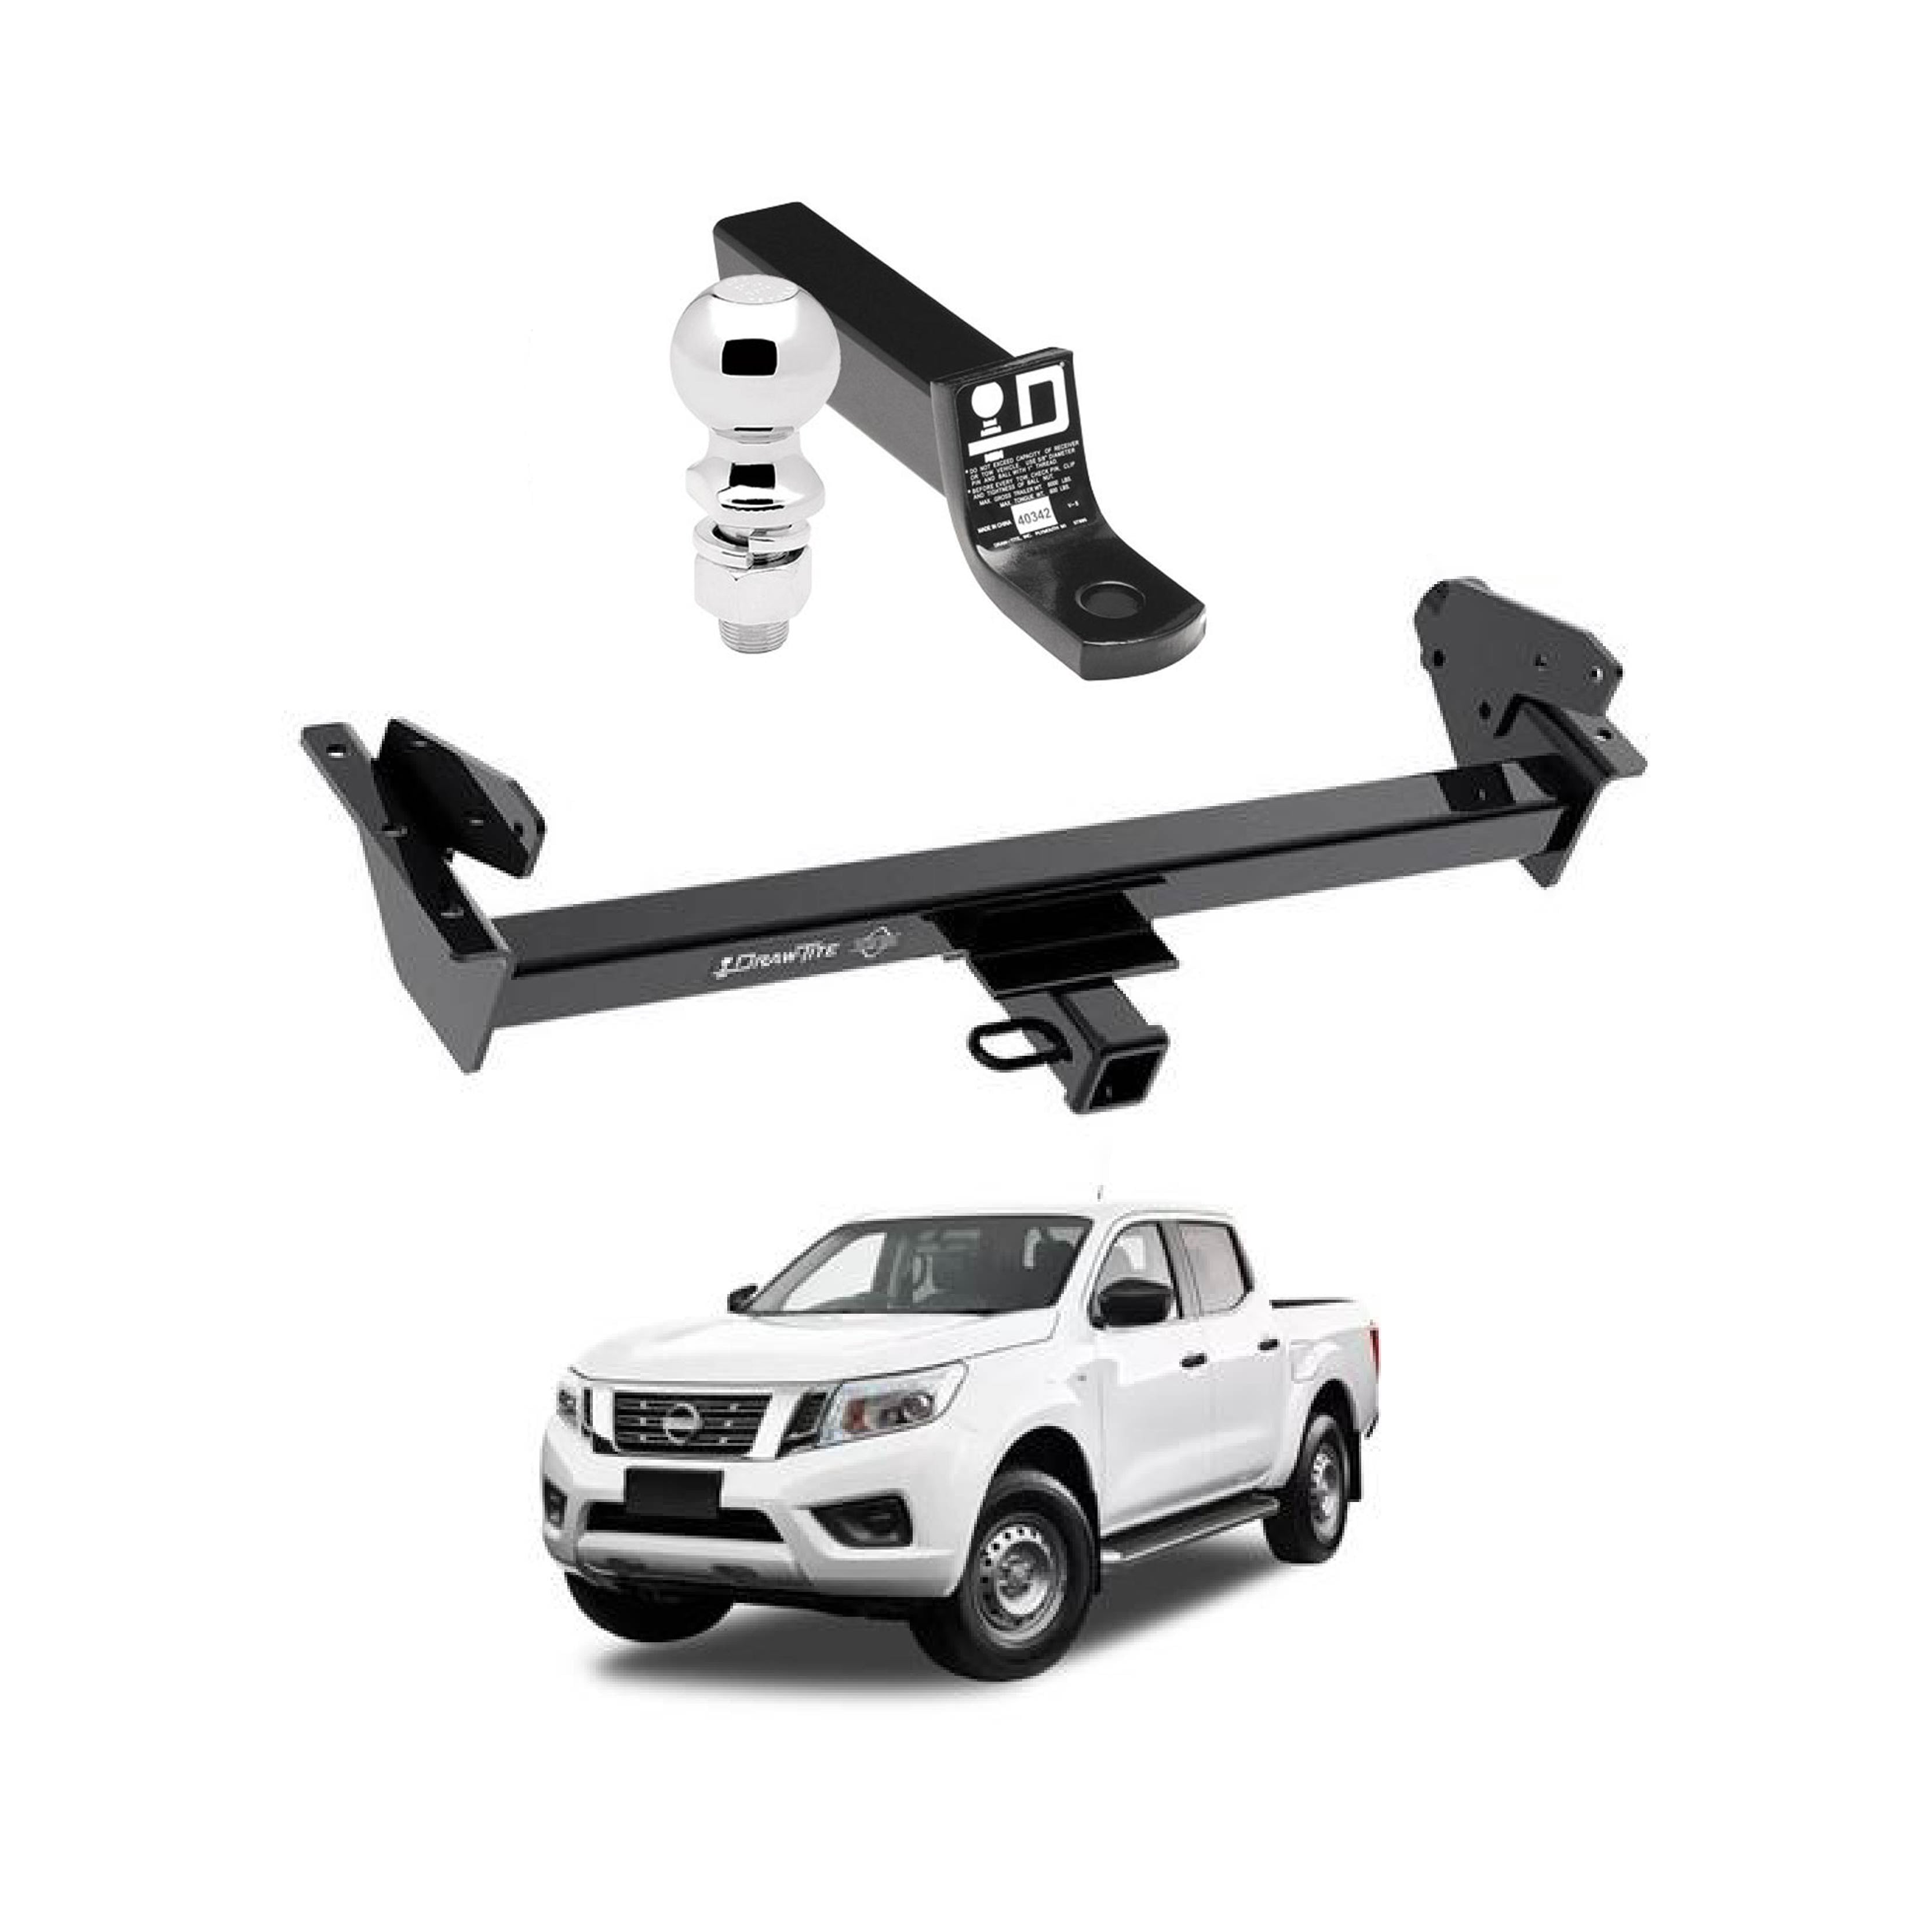 Draw Tite Towing Kit (Frame Receiver + Ball Mount) for 2016-2021 Nissan NP300